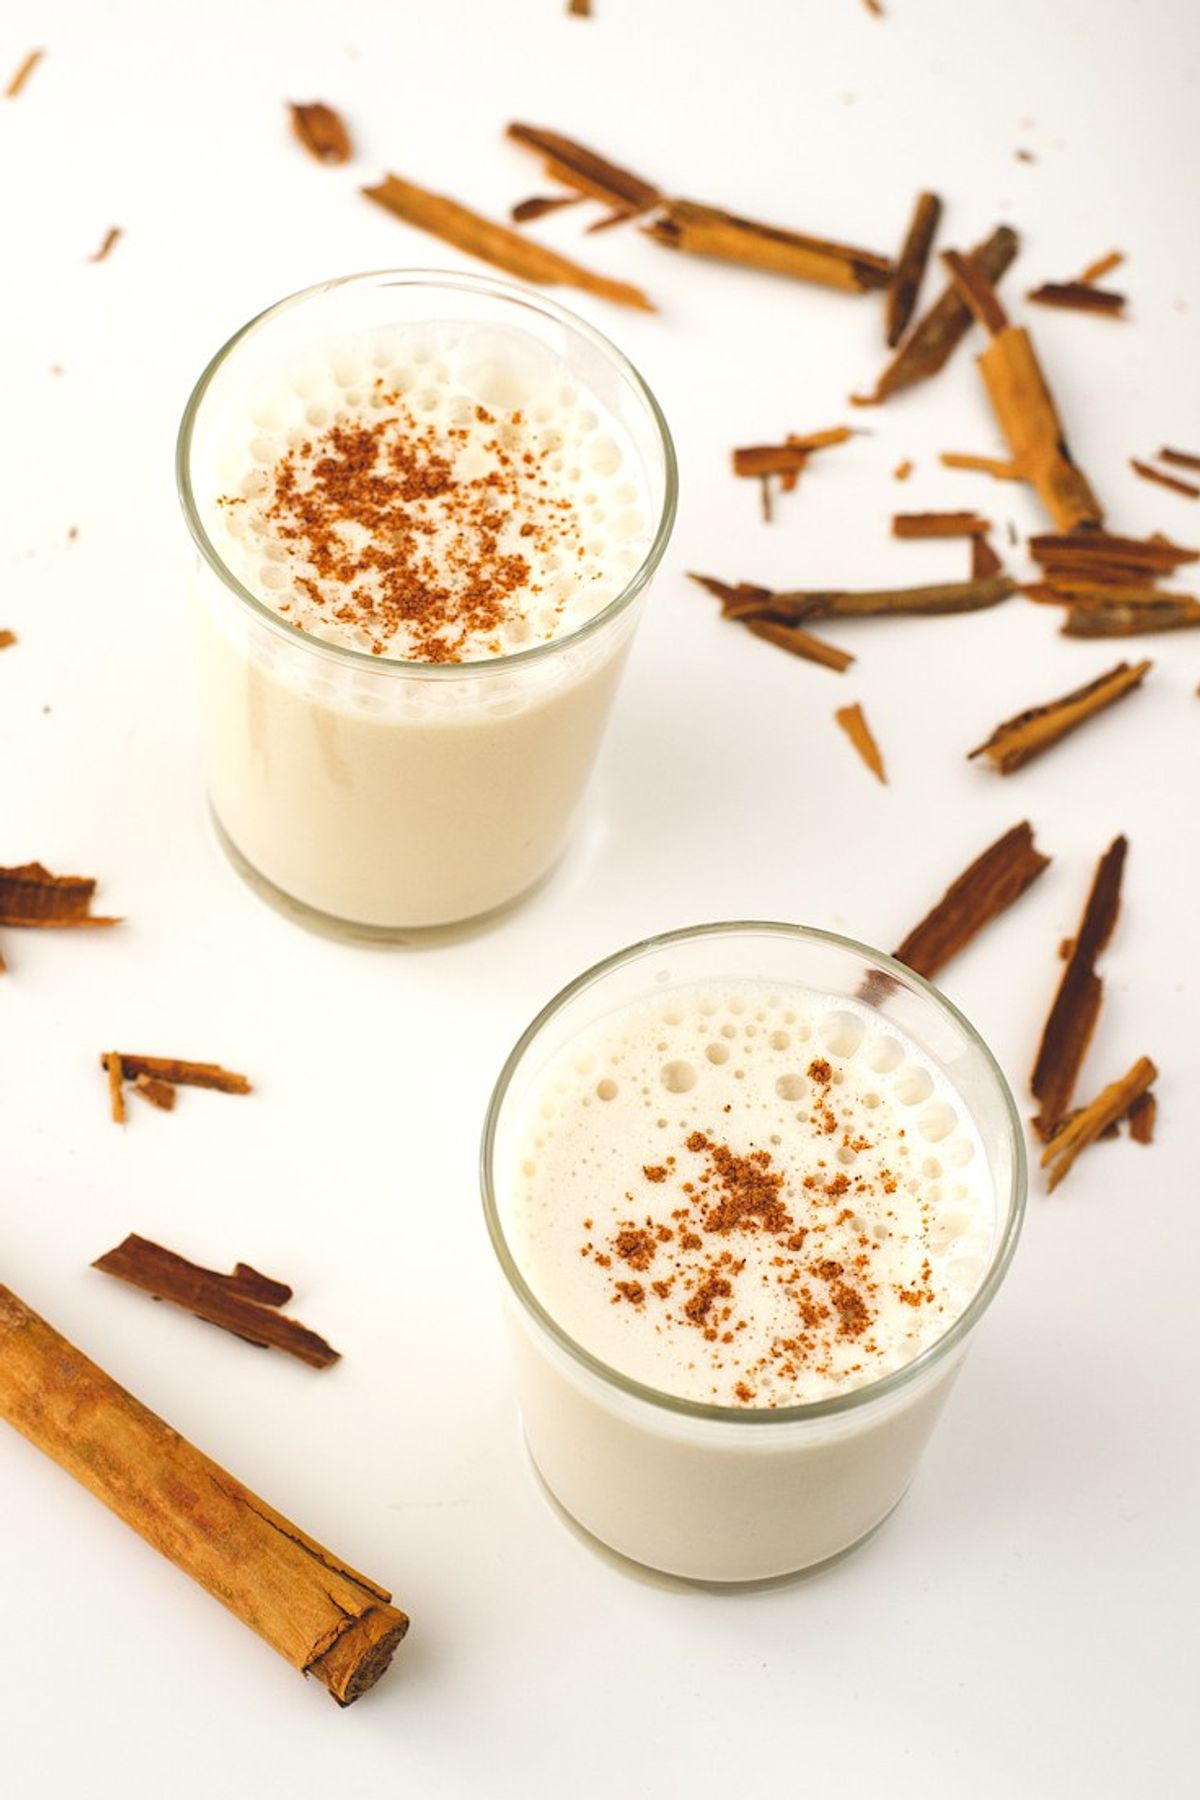 Have You Ever Met The Humble Horchata?